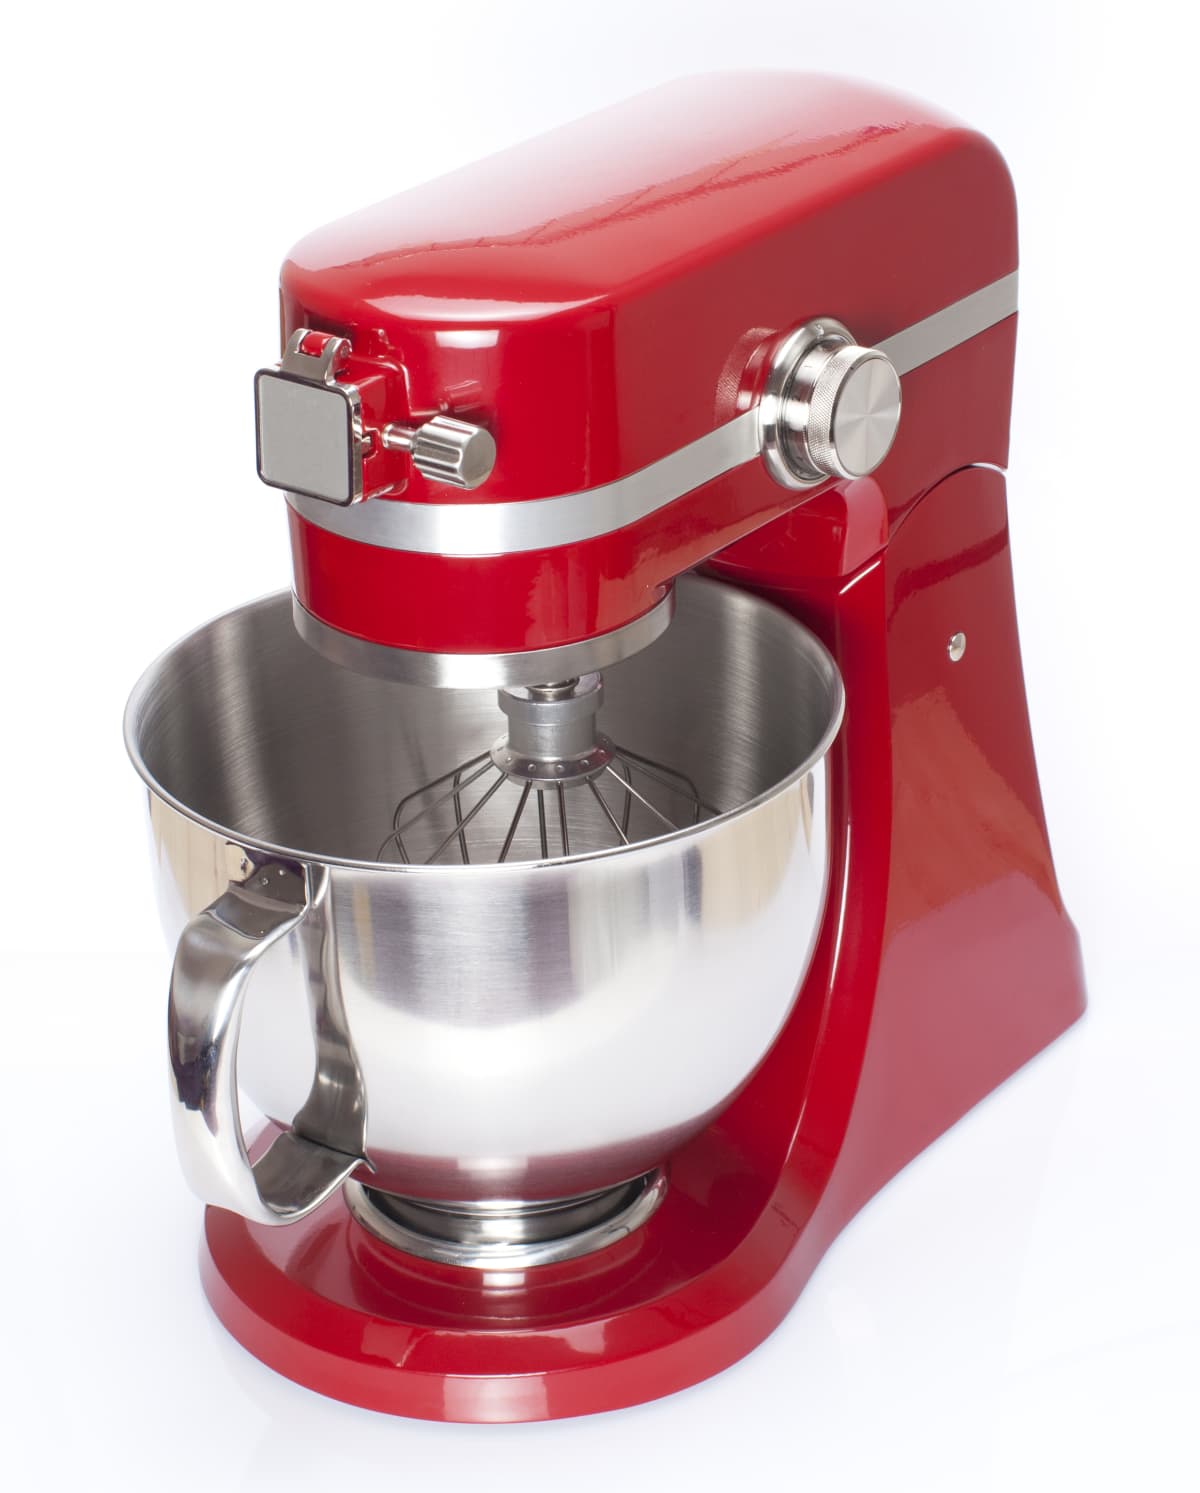 Red stand mixer with a stainless steel bowl